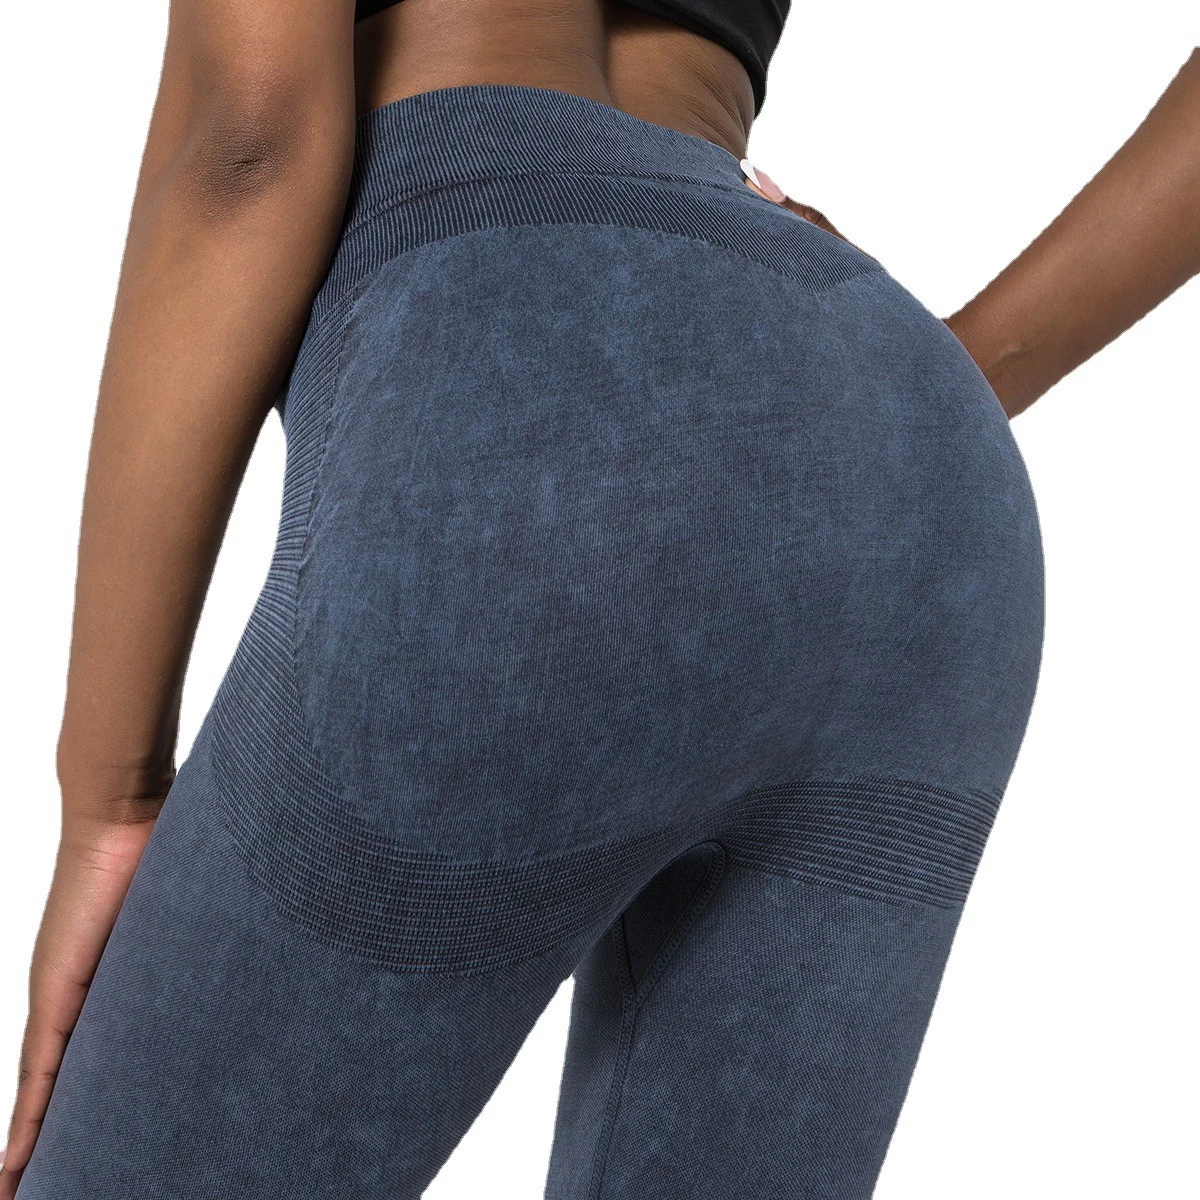 S-SHAPER High Waist Seamless Imitate Jeans Print Leggings Supplier Push Up Fashion Pants Workout for Women Quick drying Athleisure